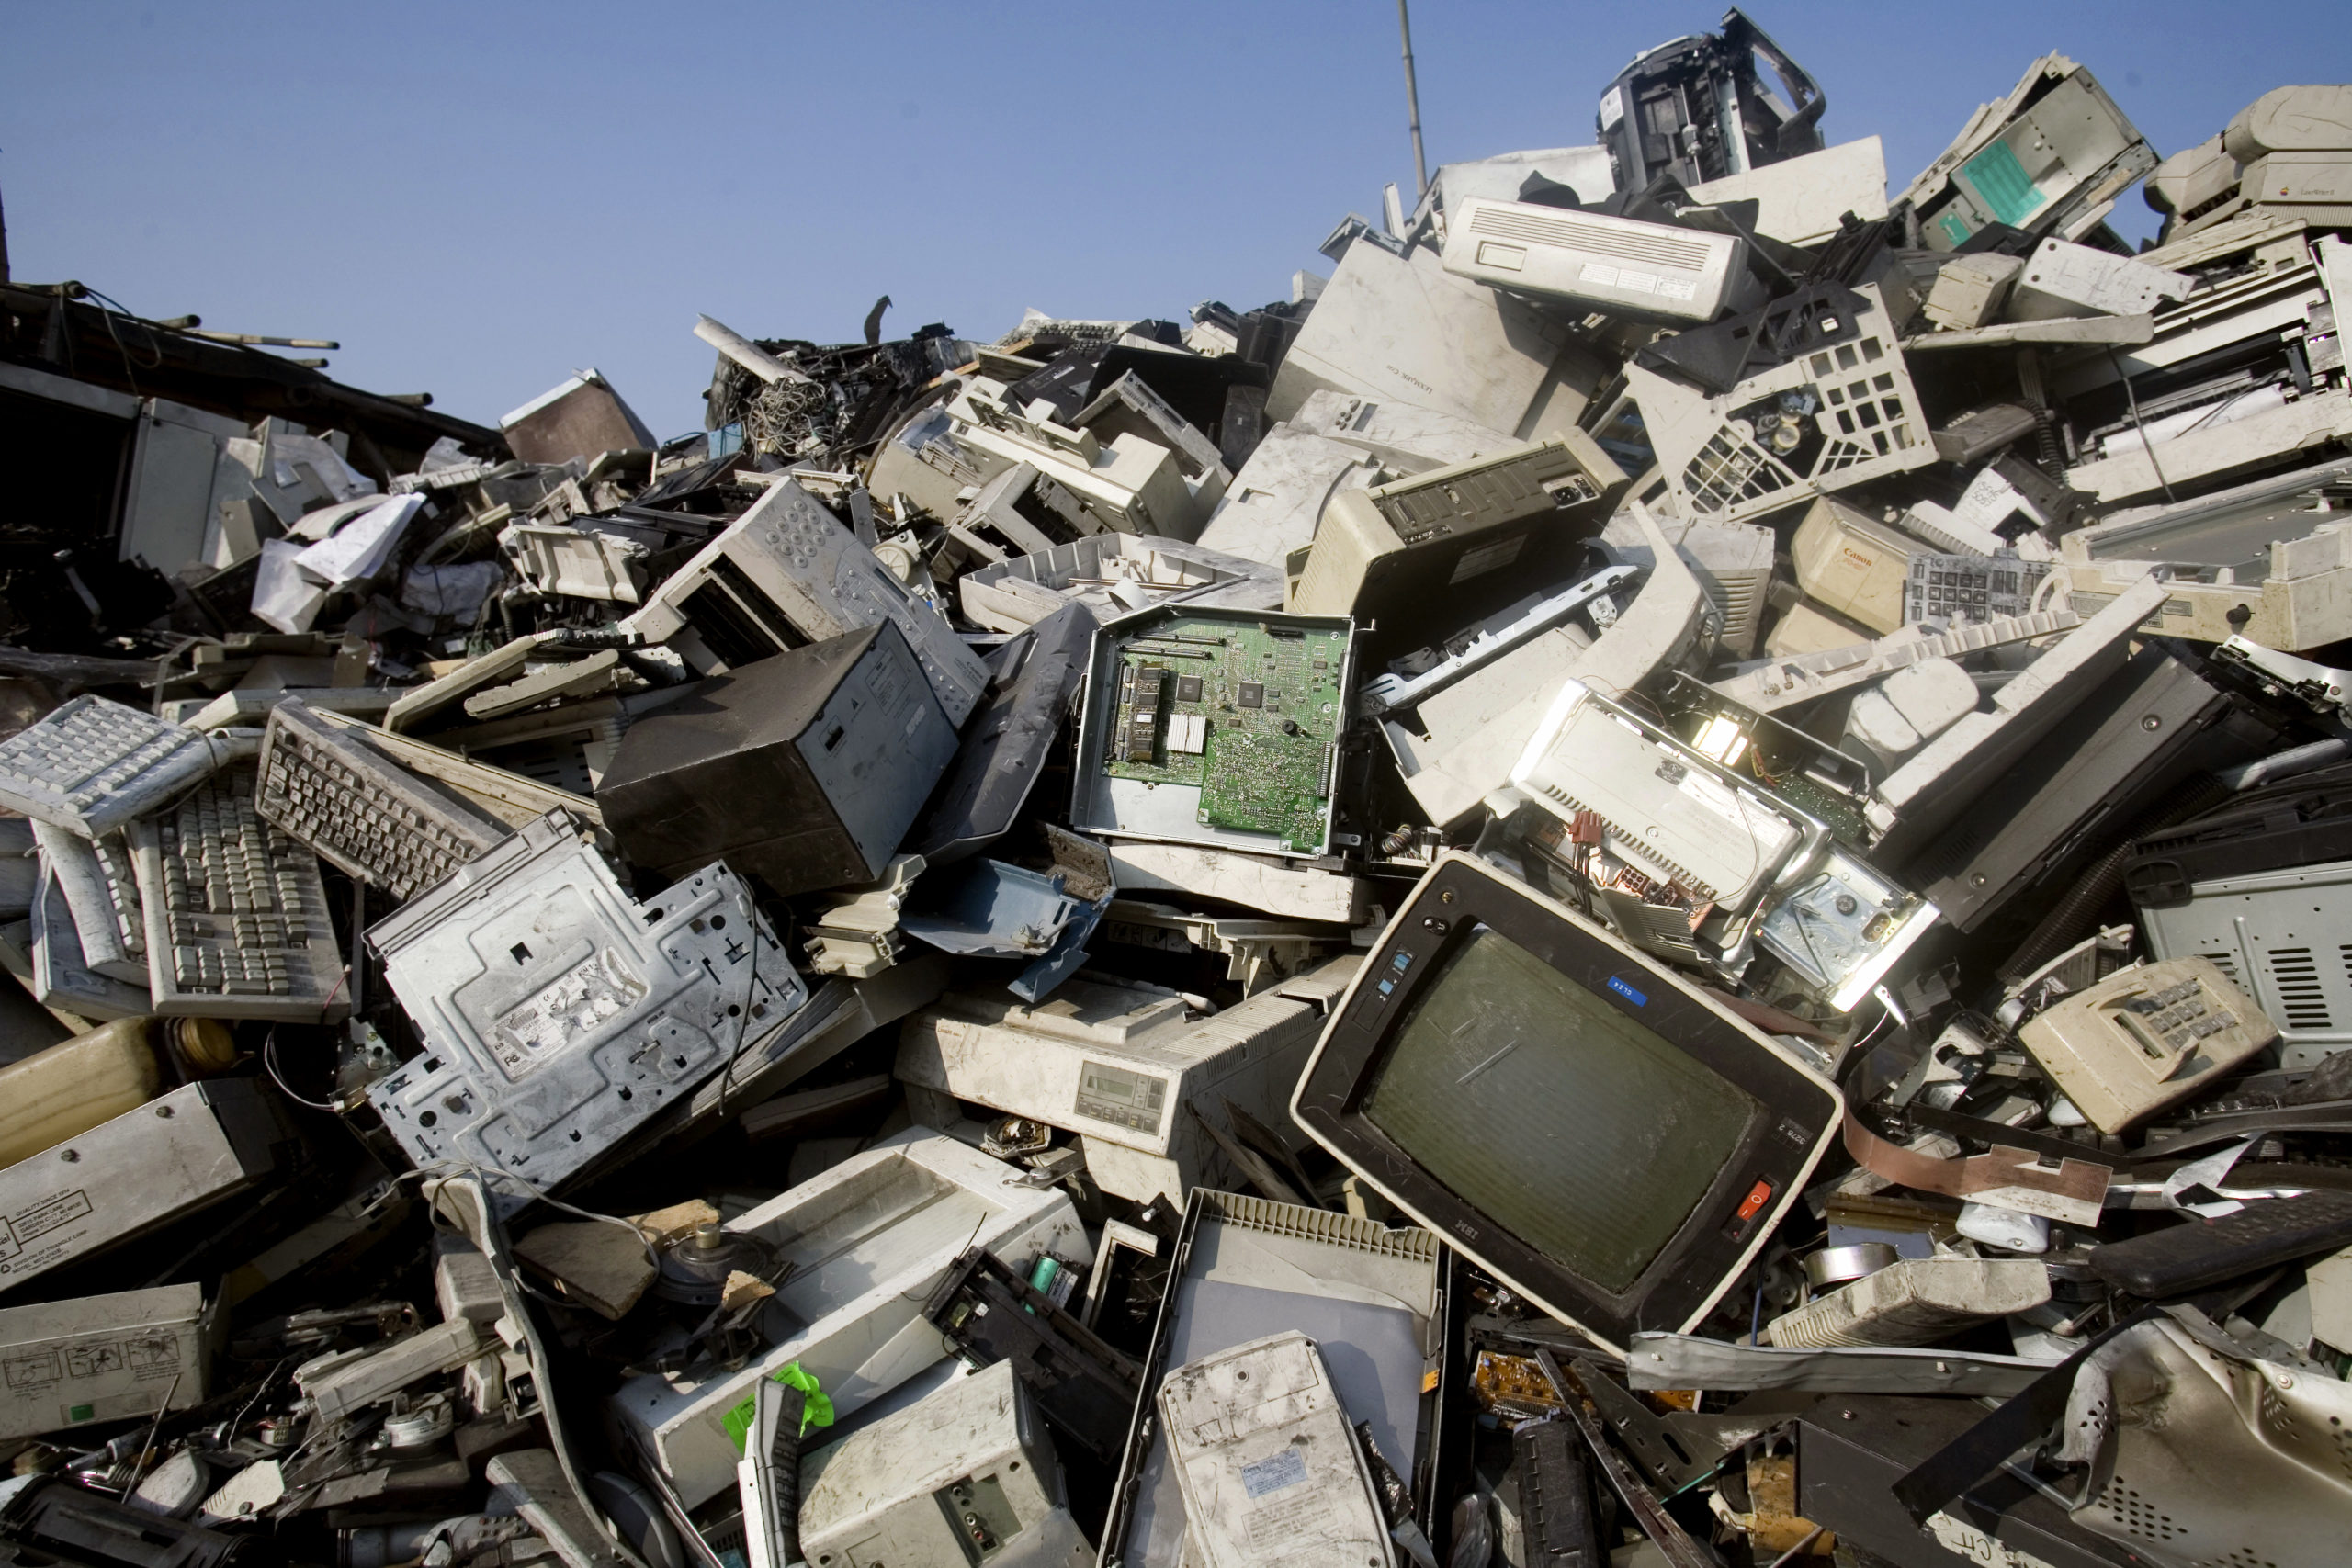 forty-per-cent-of-global-e-waste-comes-from-asia